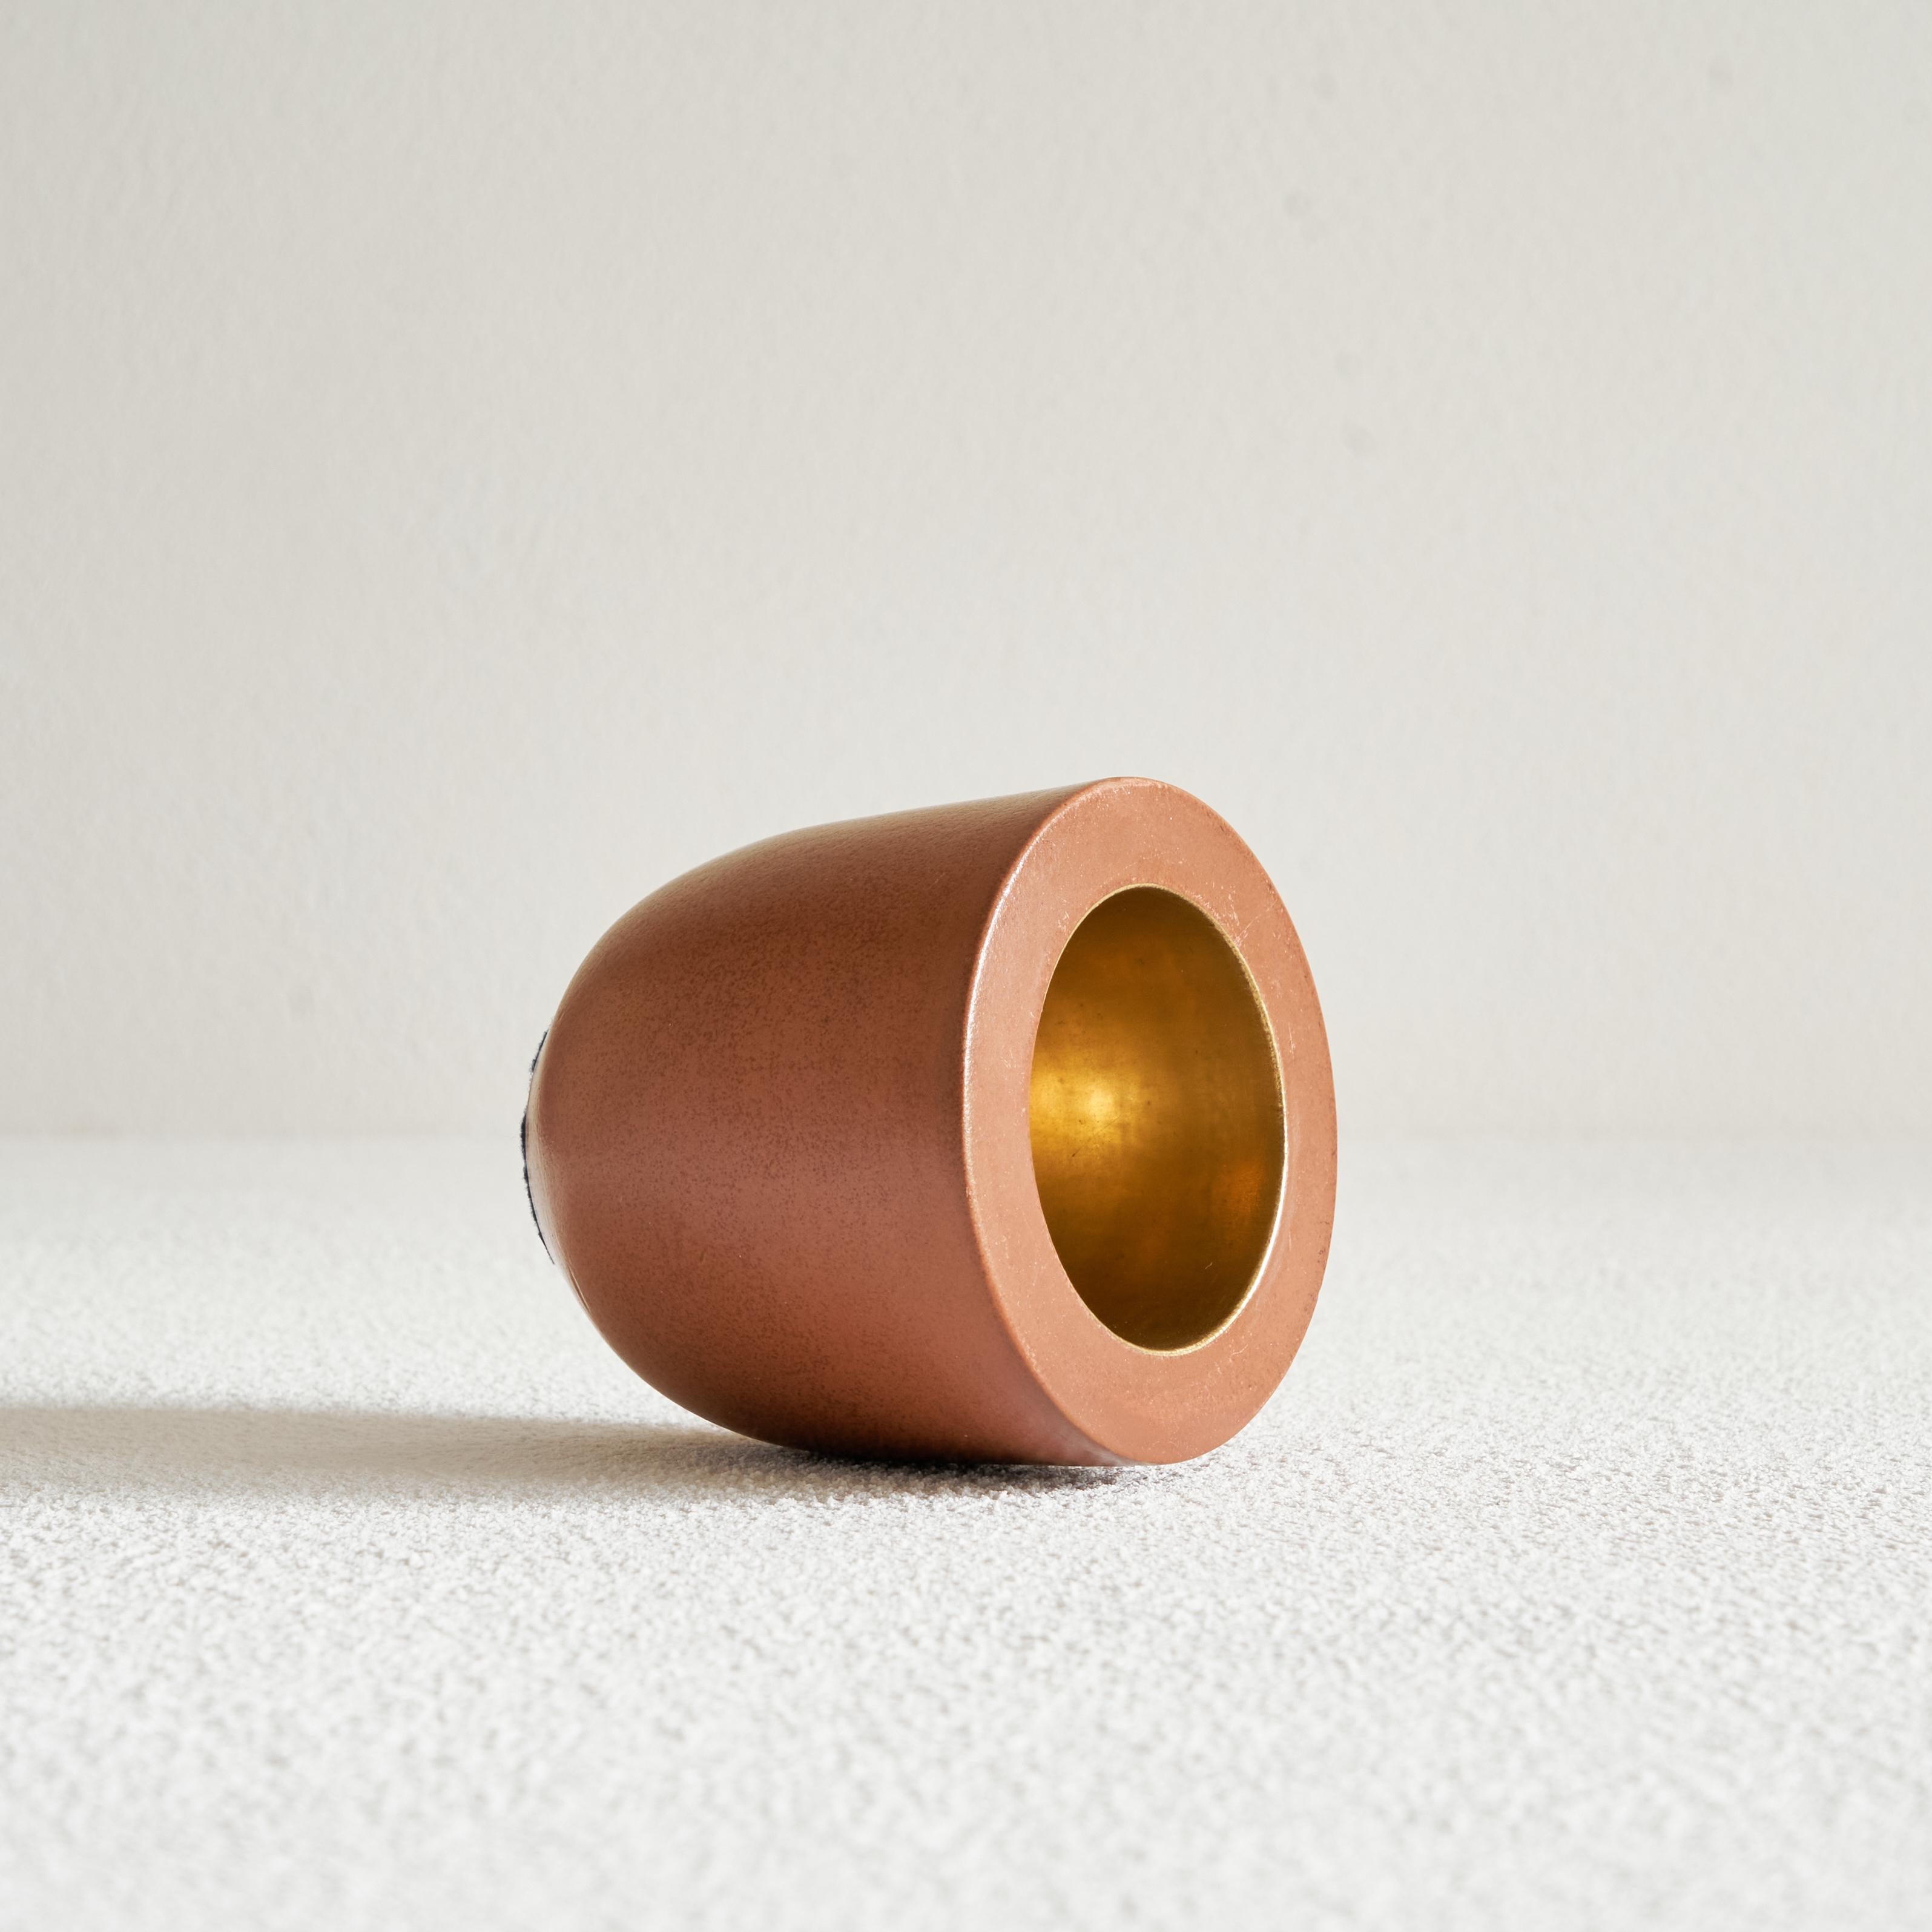 Mid-Century Modern Gio Ponti for Richard Ginori Vase in Terracotta and Gold, 1930s For Sale